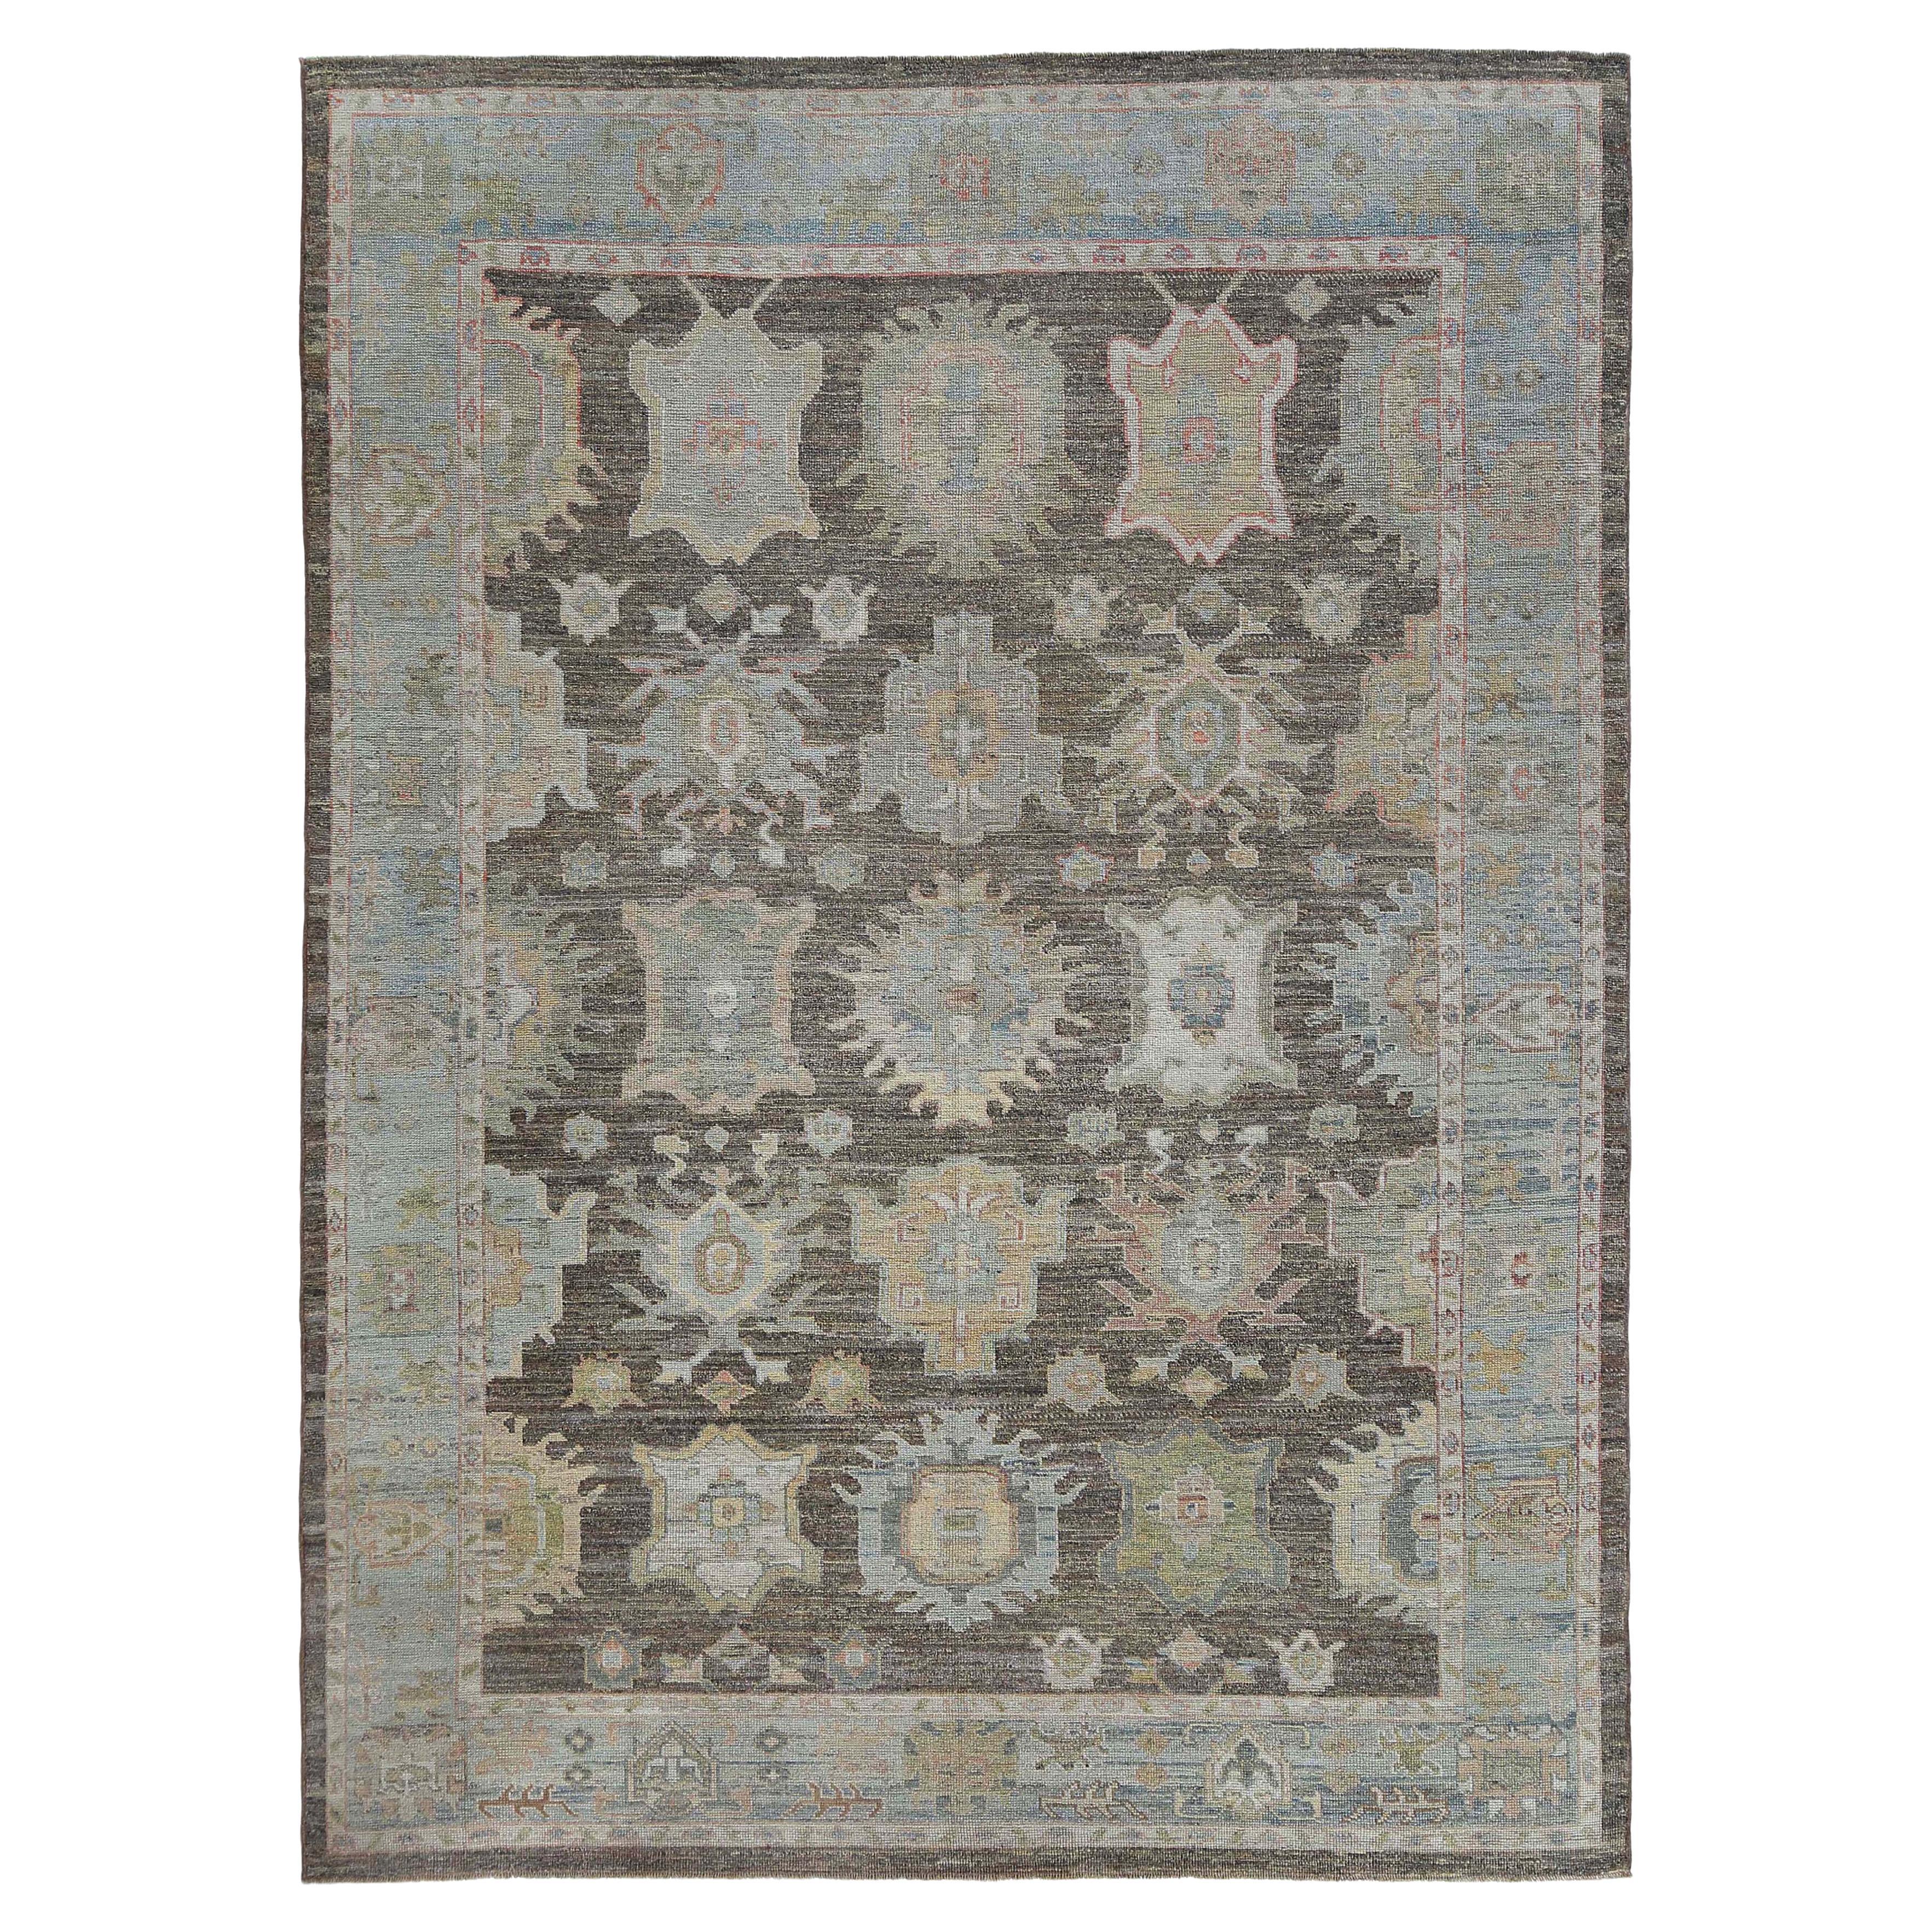 Unique Brown and Blue Oushak Rug